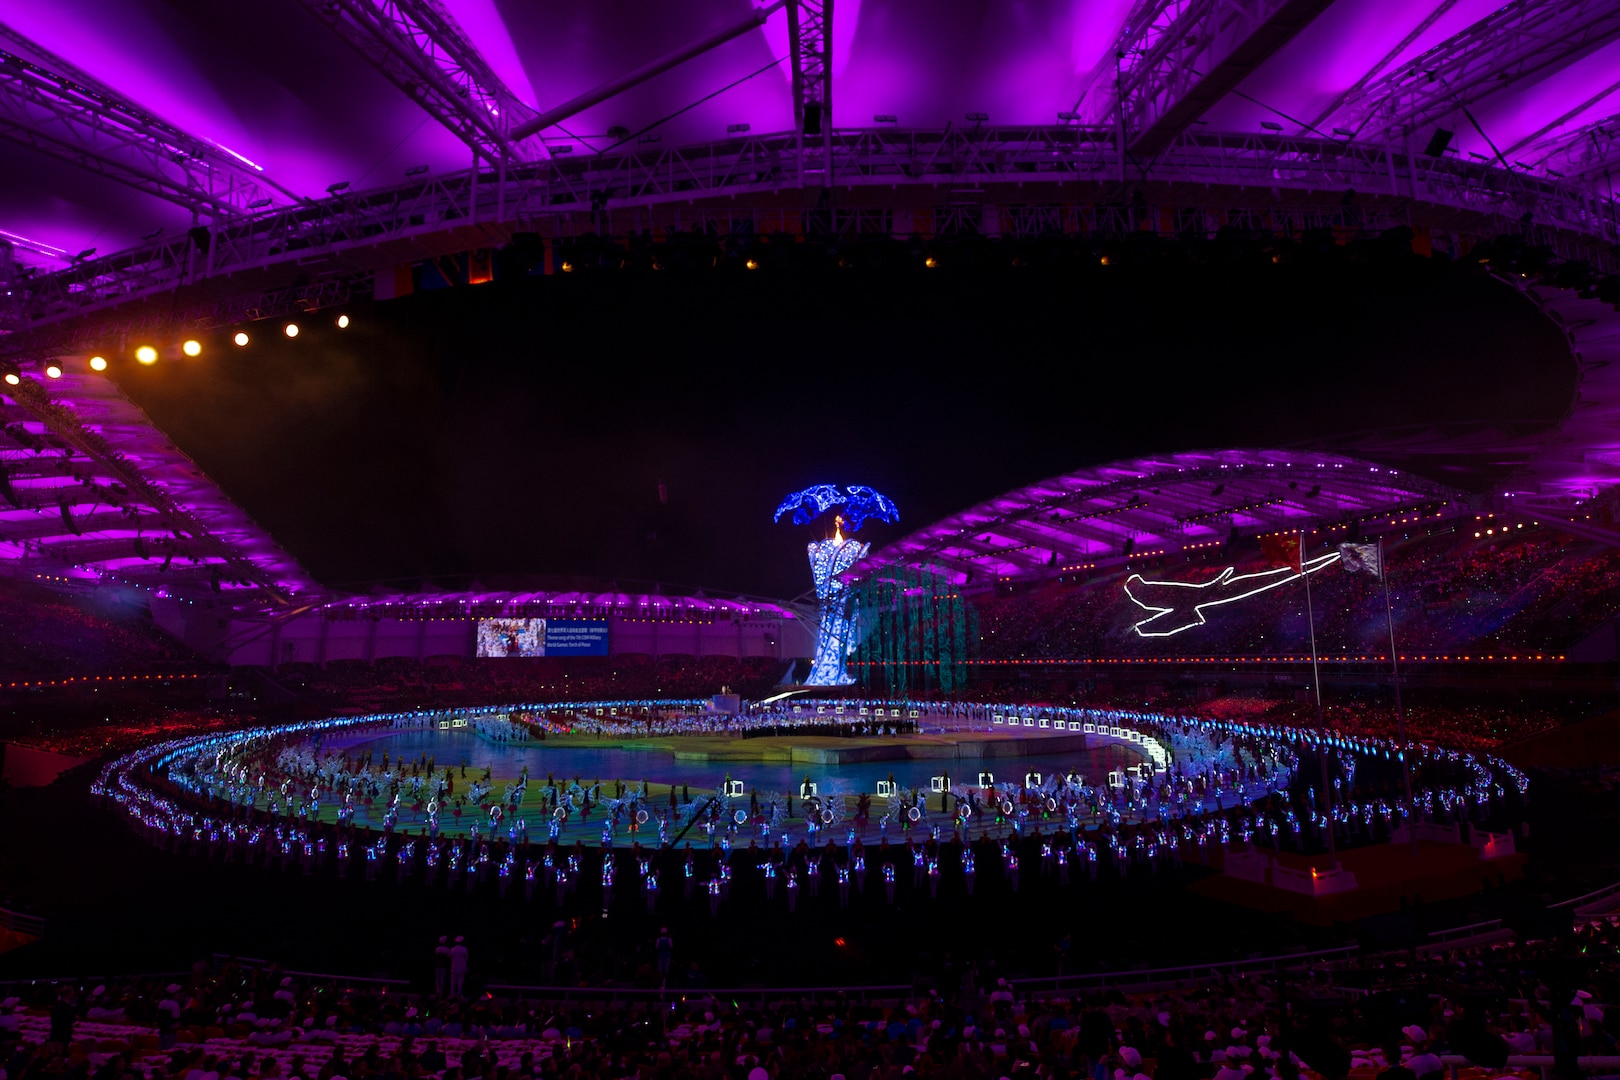 Entertainers performer during opening ceremonies for the 2019 CISM Military World Games in Wuhan, China Oct. 18, 2019. Teams from more than 100 countries will compete in dozens of sporting events through Oct. 28. (DoD photo by EJ Hersom)